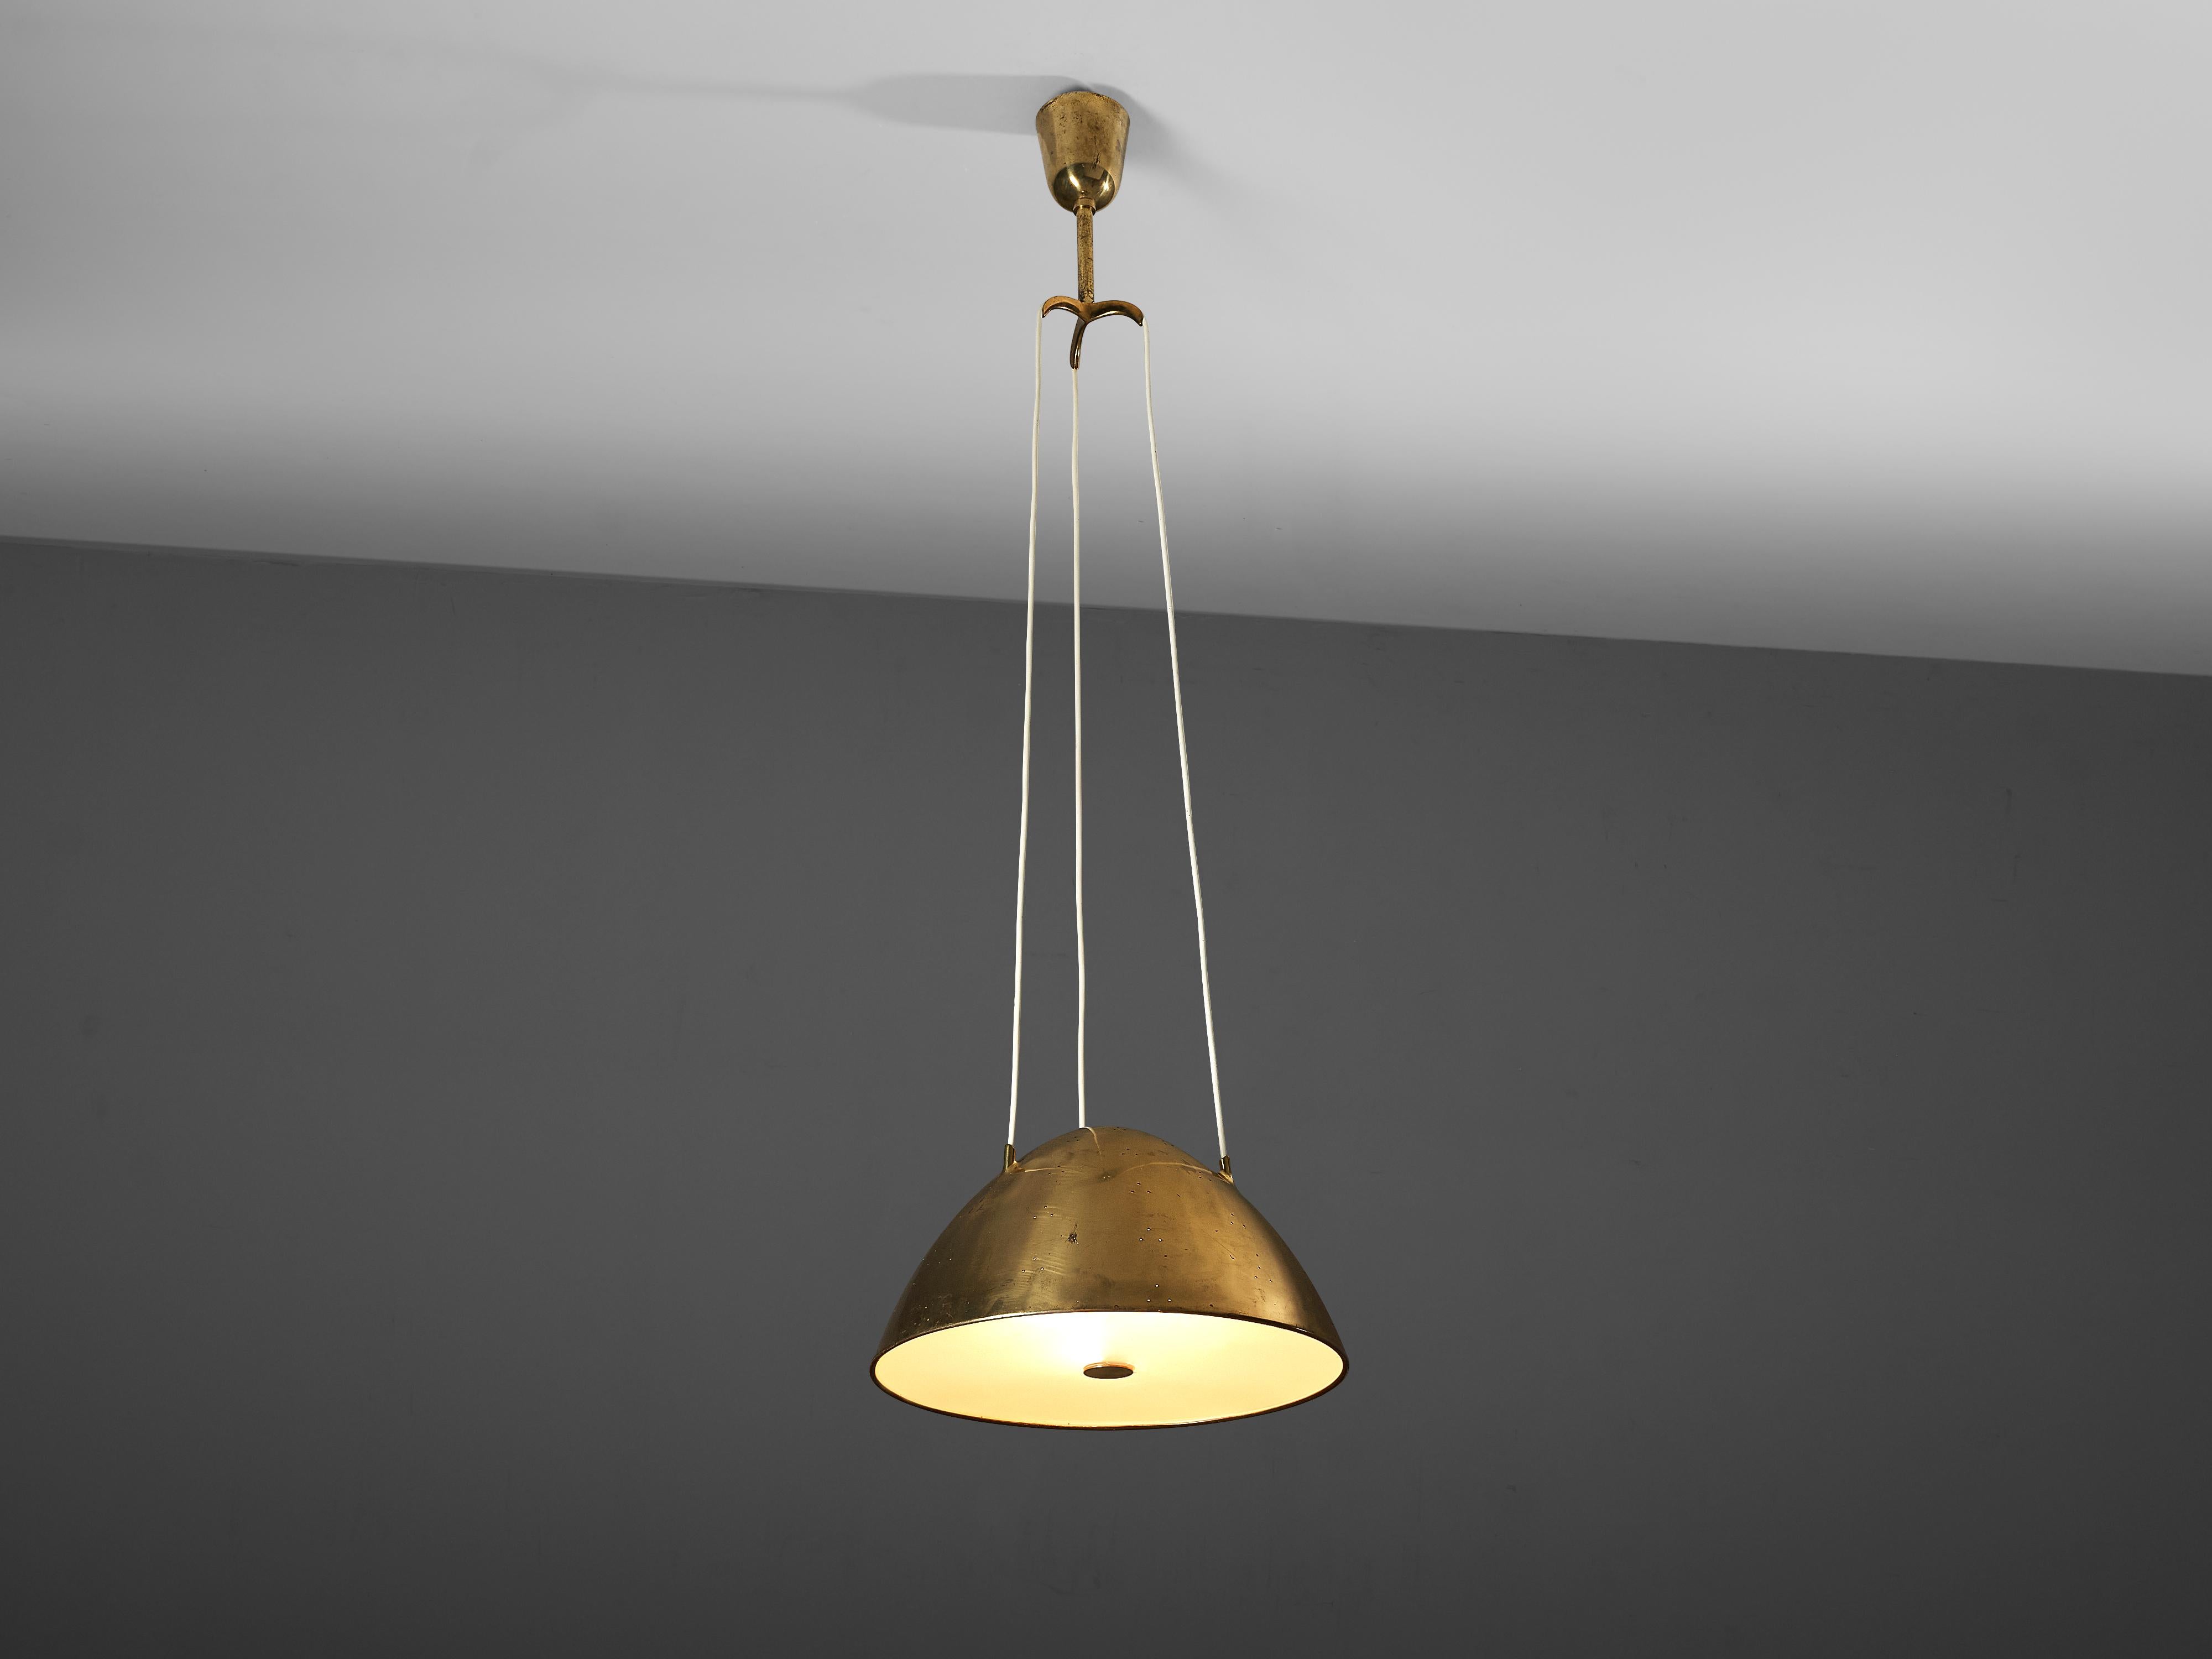 Paavo Tynell for Taito Oy, pendant lamp model 1959, brass, glass, Finland, 1950s

Dome-shaped pendant lamp by Finnish designer Paavo Tynell. The model ‘1959’ features all characteristics of Tynell’s fabulous designs. A wonderfully formed lampshade